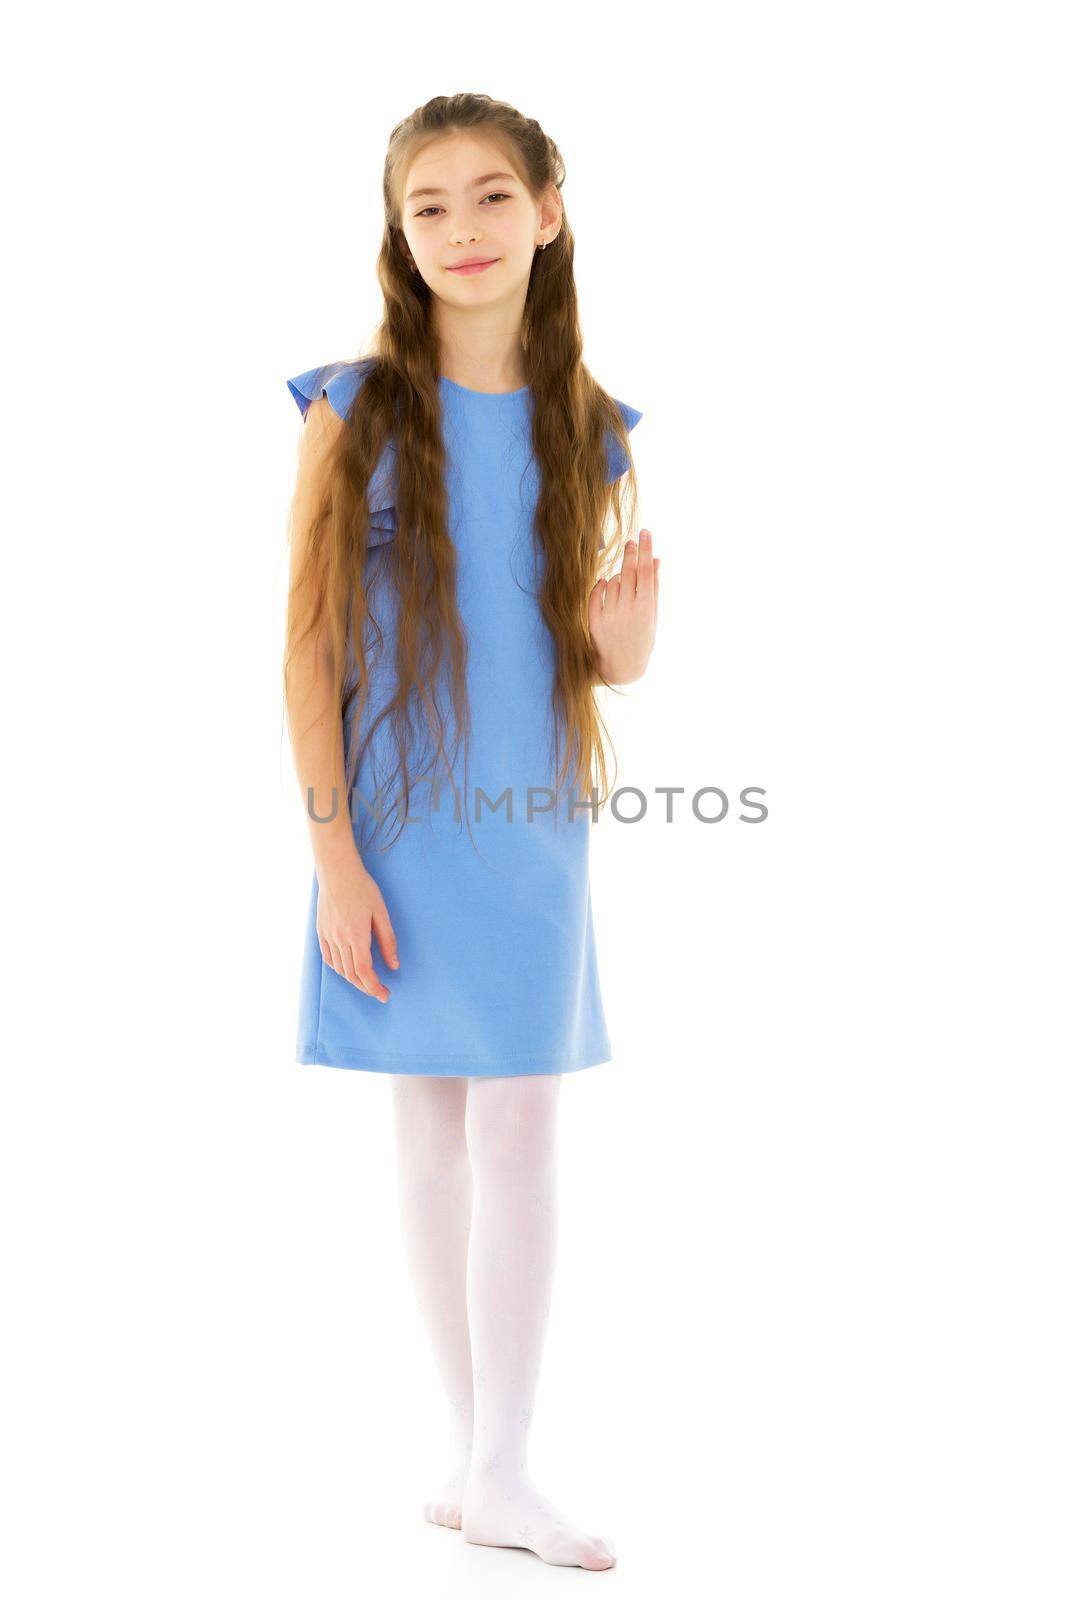 A charming little school girl corrects her long silky hair with her hands. The concept of style and fashion, happy people. Isolated on white background.